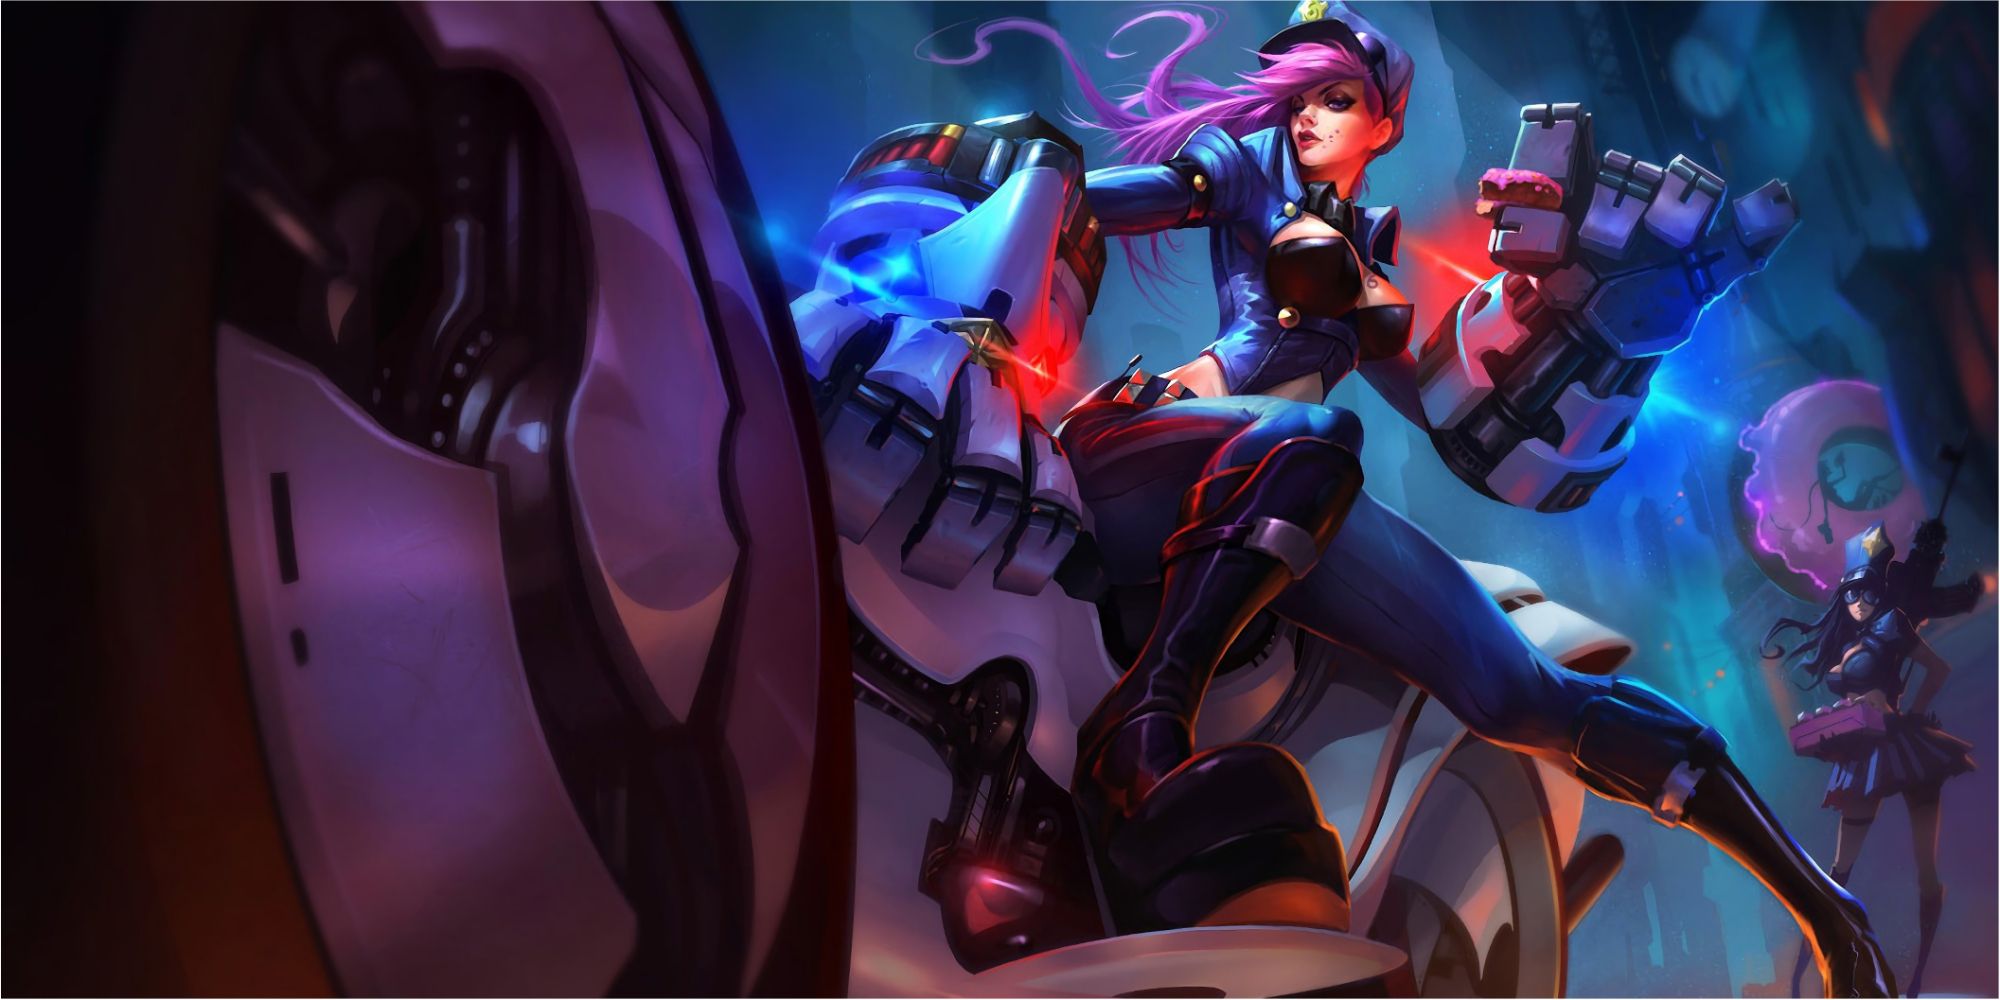 Officer Vi holding a little donut in her massive gauntlet while Officer Caitlyn stands behind her, jinx further back